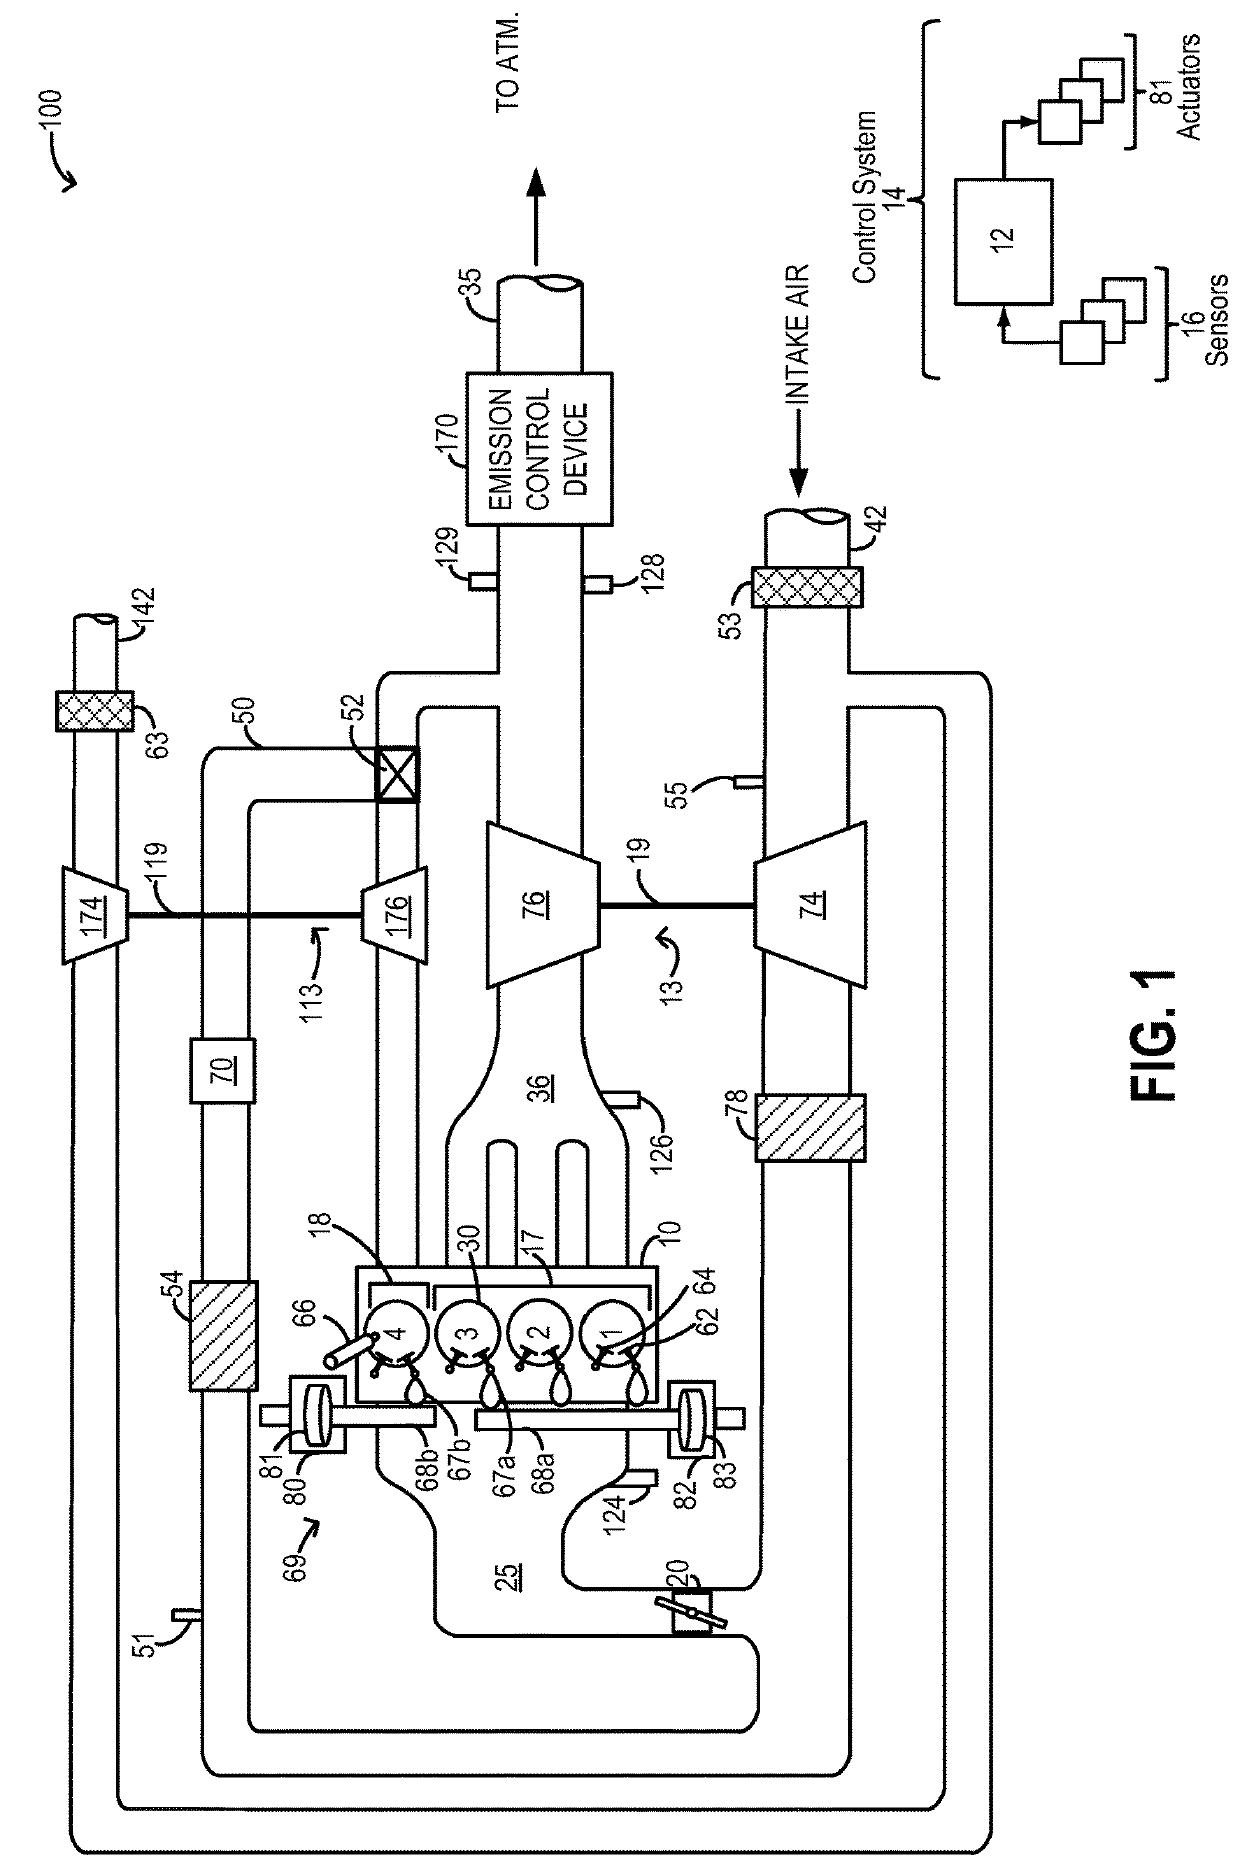 Systems and methods for boost control